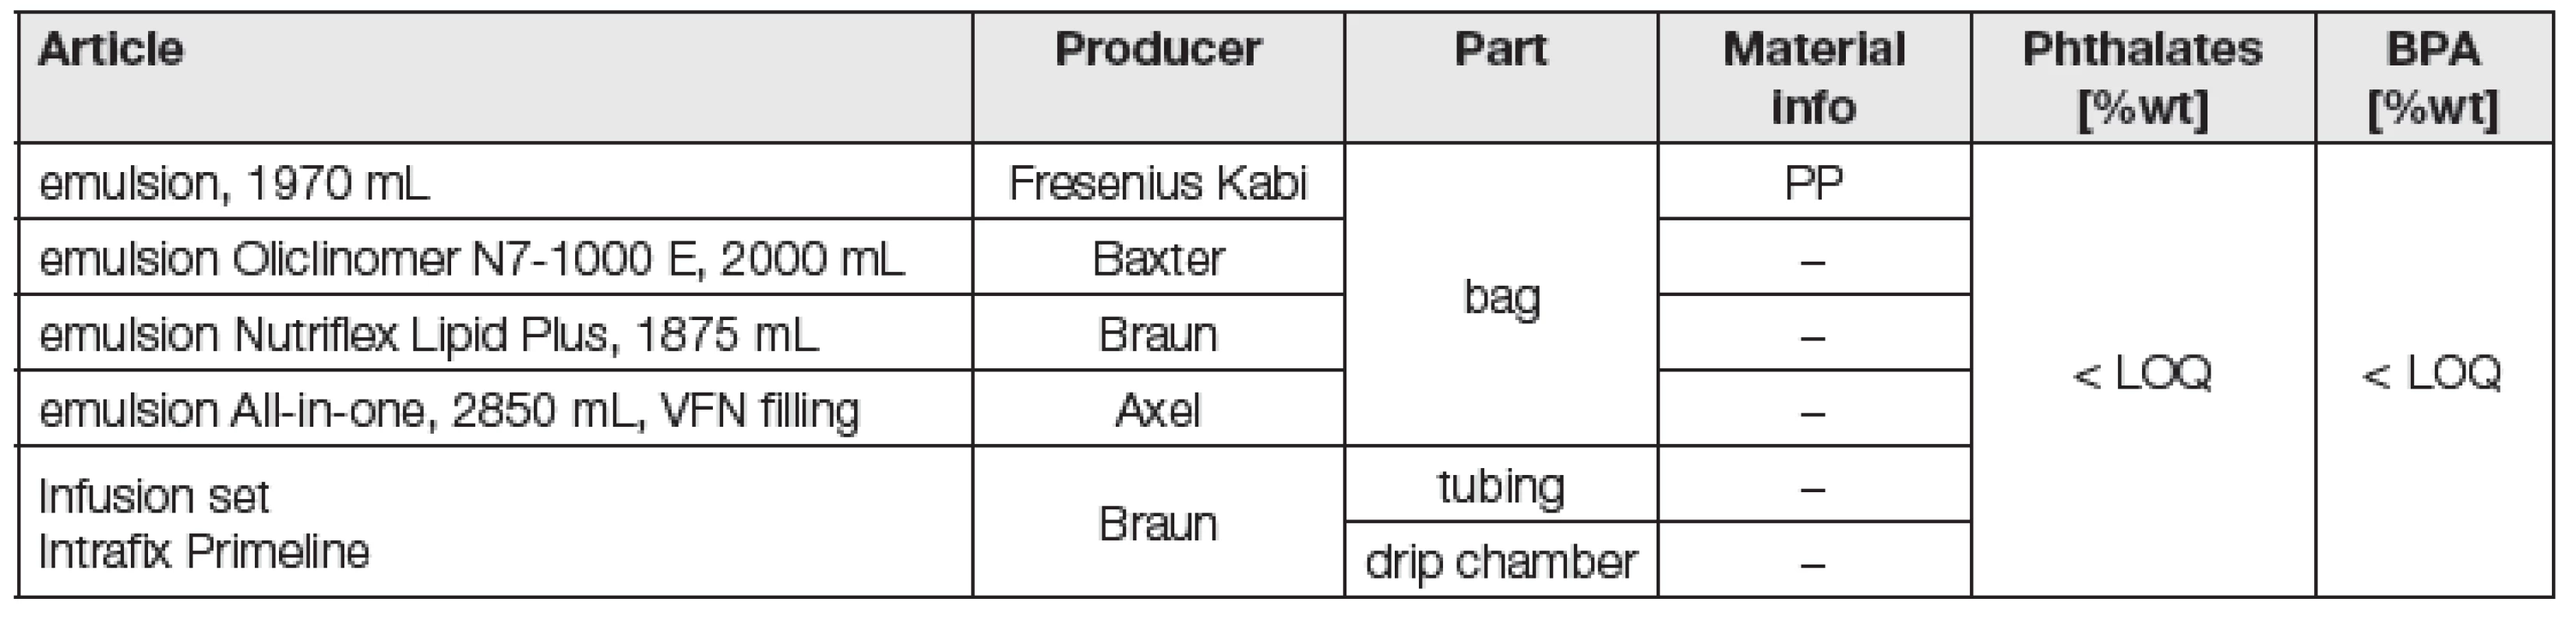 Overview of materials of bags and intravenous sets used in VFN, Prague; phthalate and BPA concentration in plastic parts